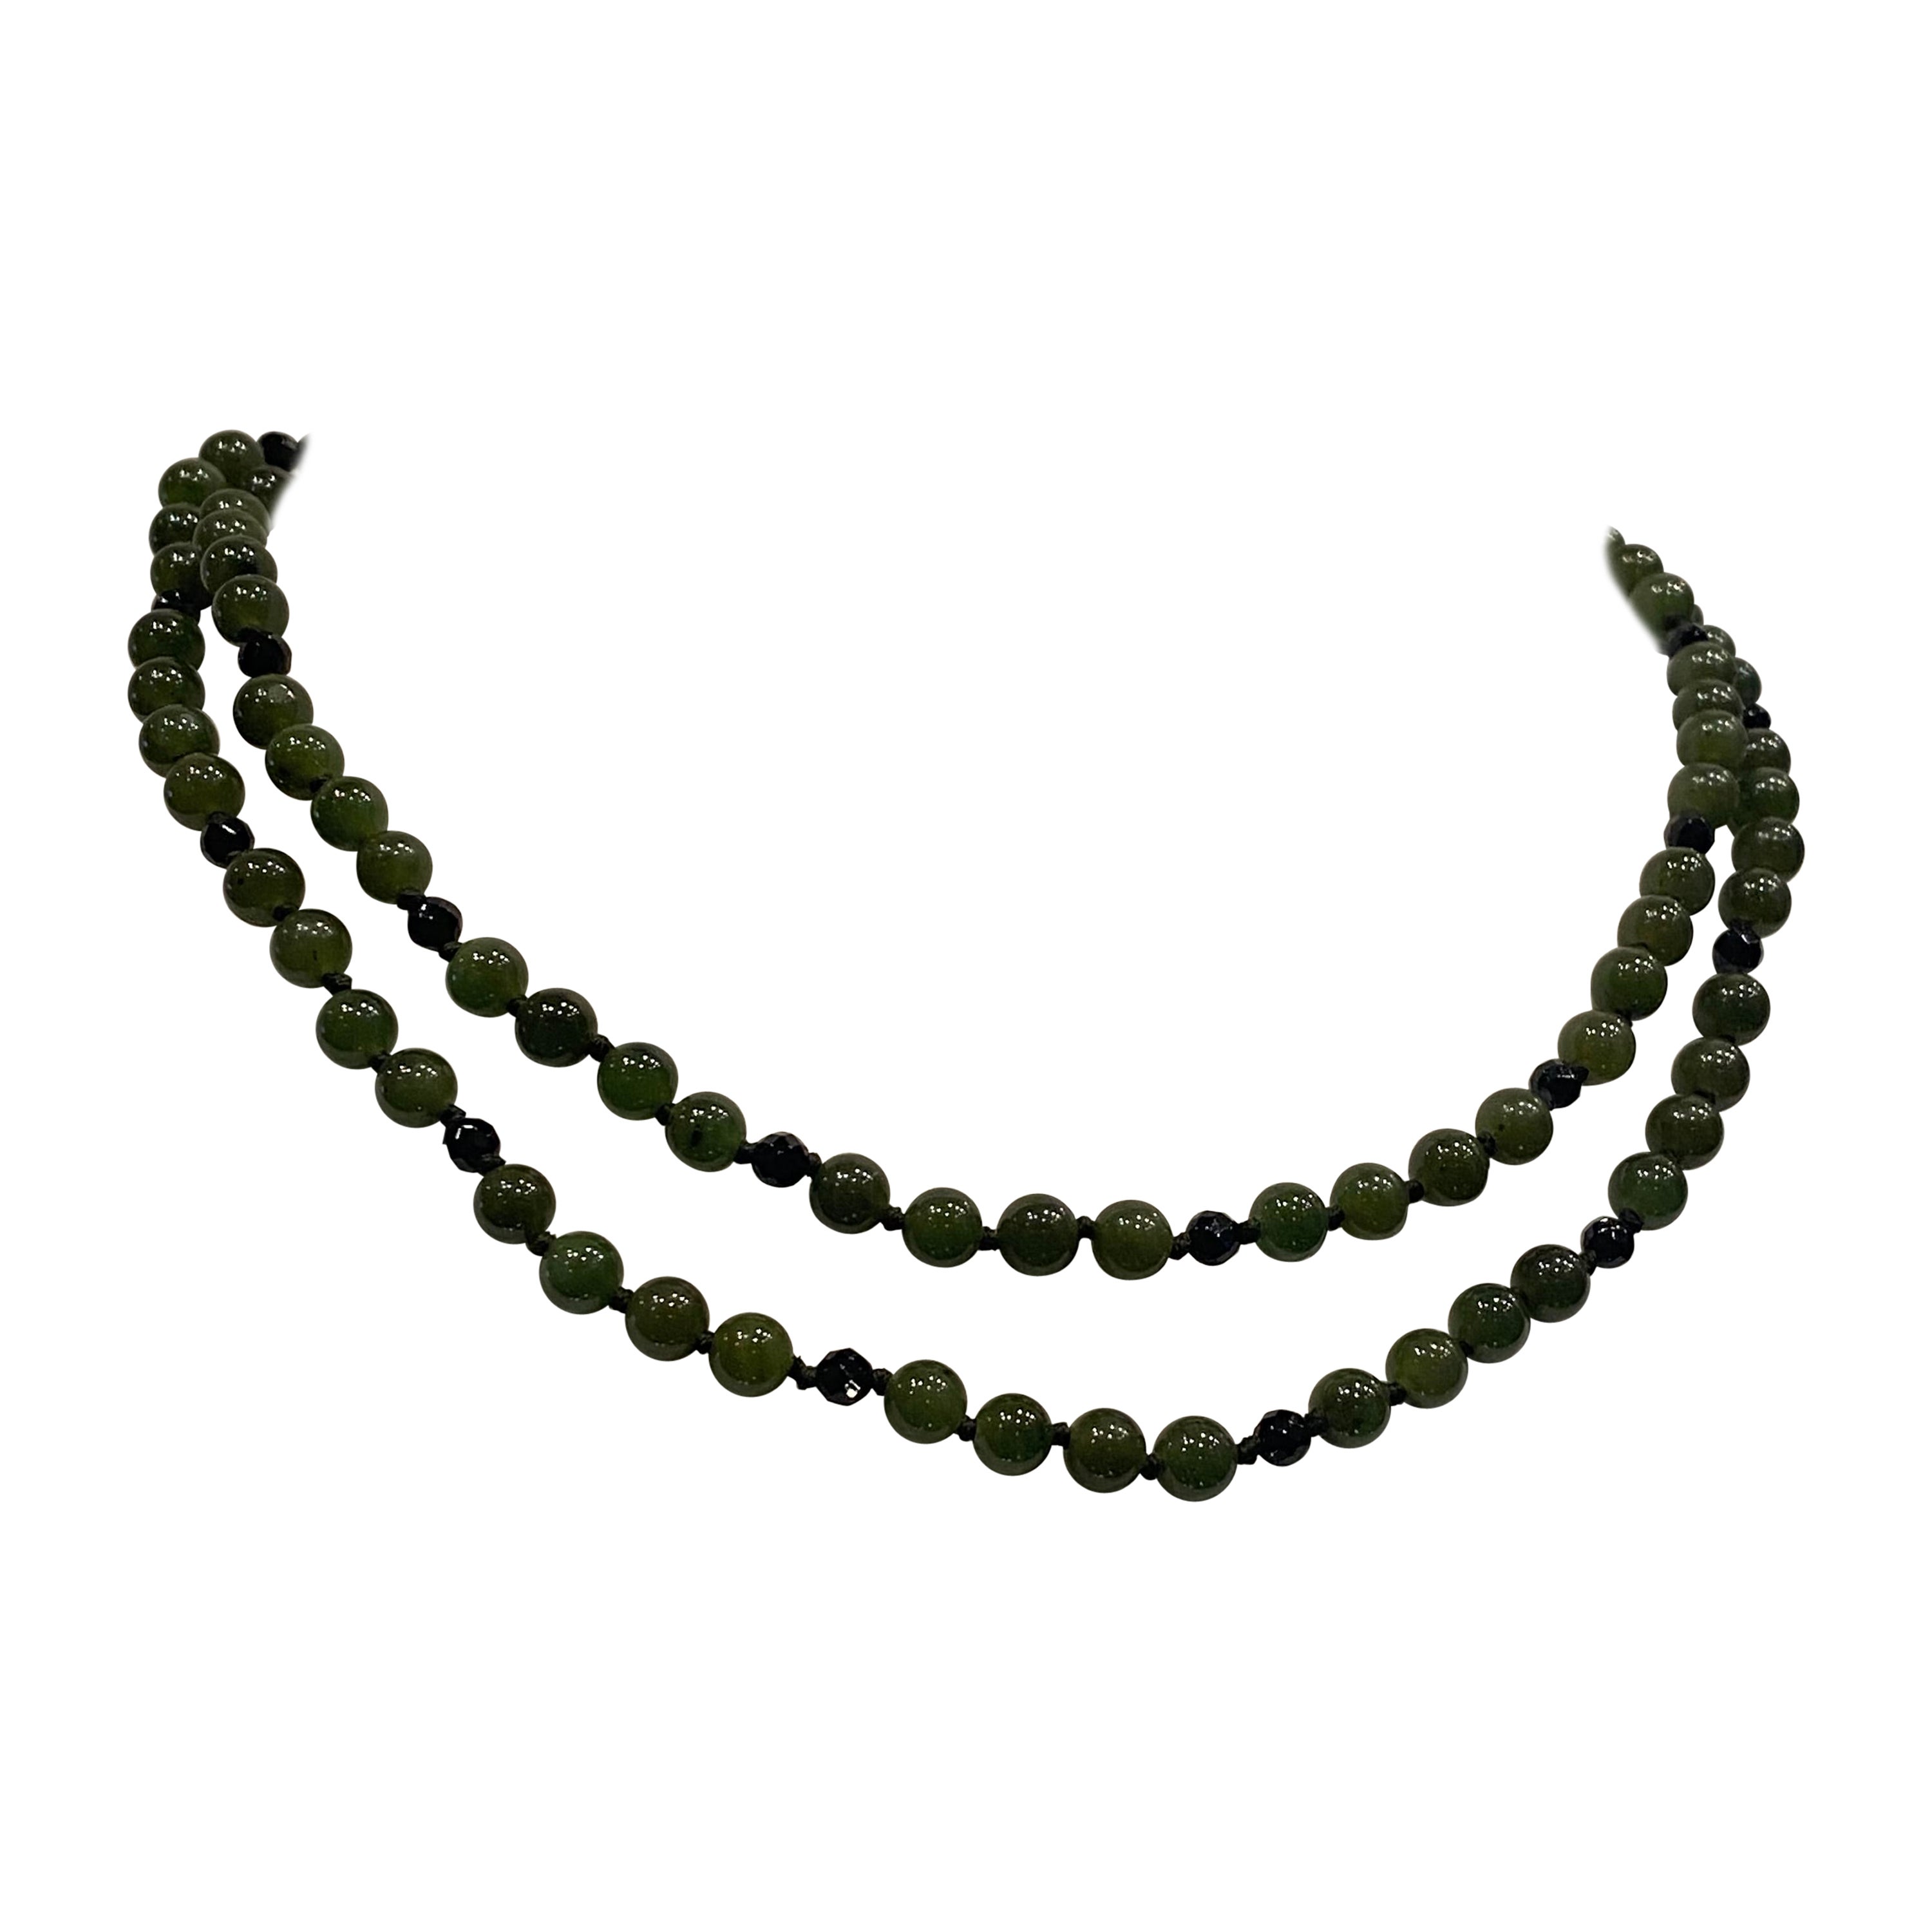 Double Strand Deep Intense Green Jade, Onyx, Gold Beaded Necklace, c1960's.